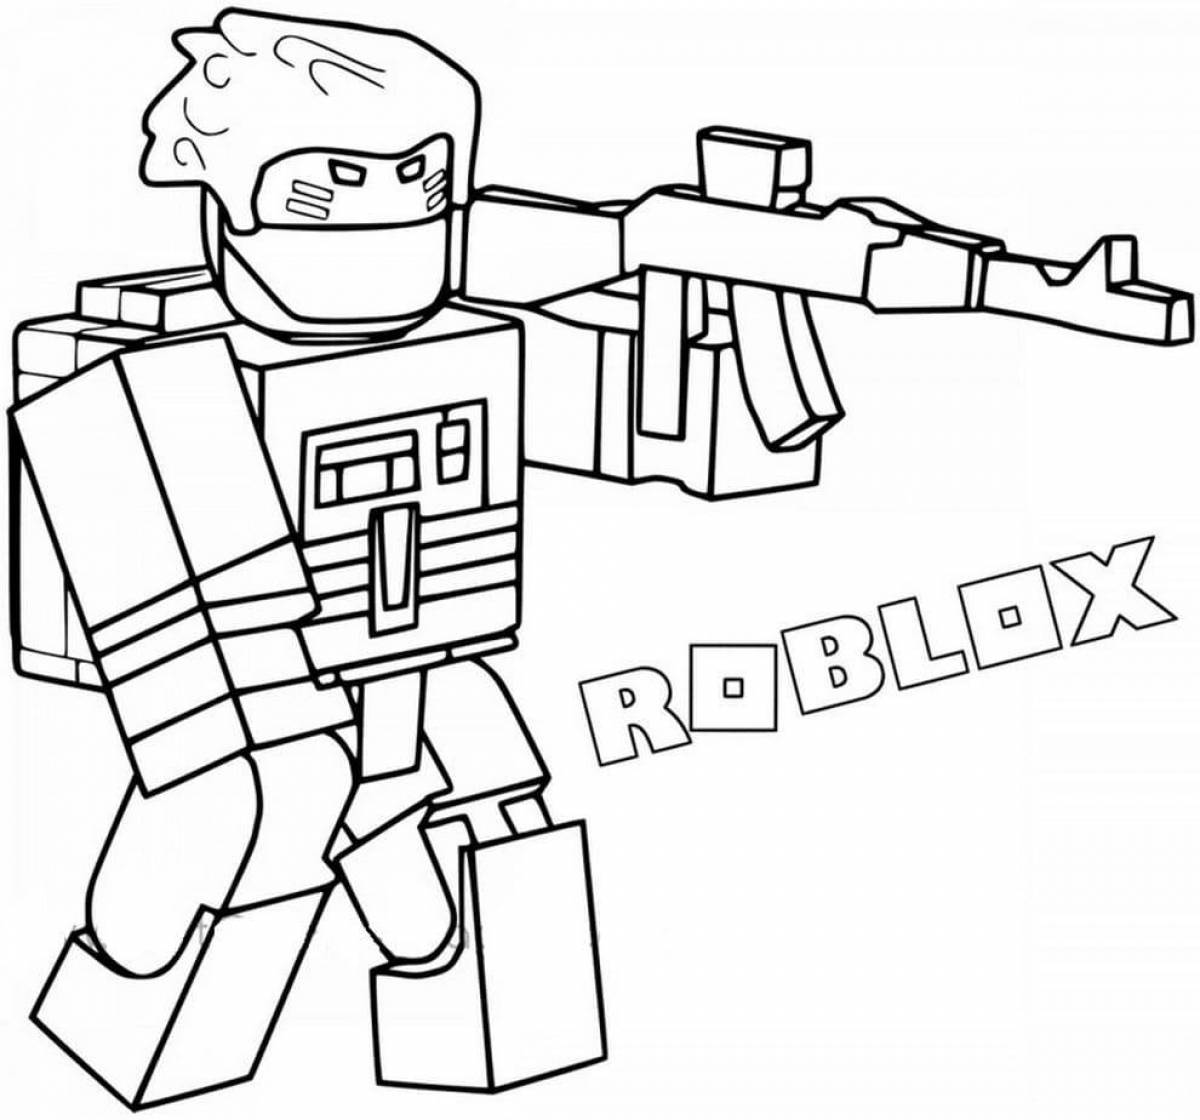 Roblox colorful queen coloring book